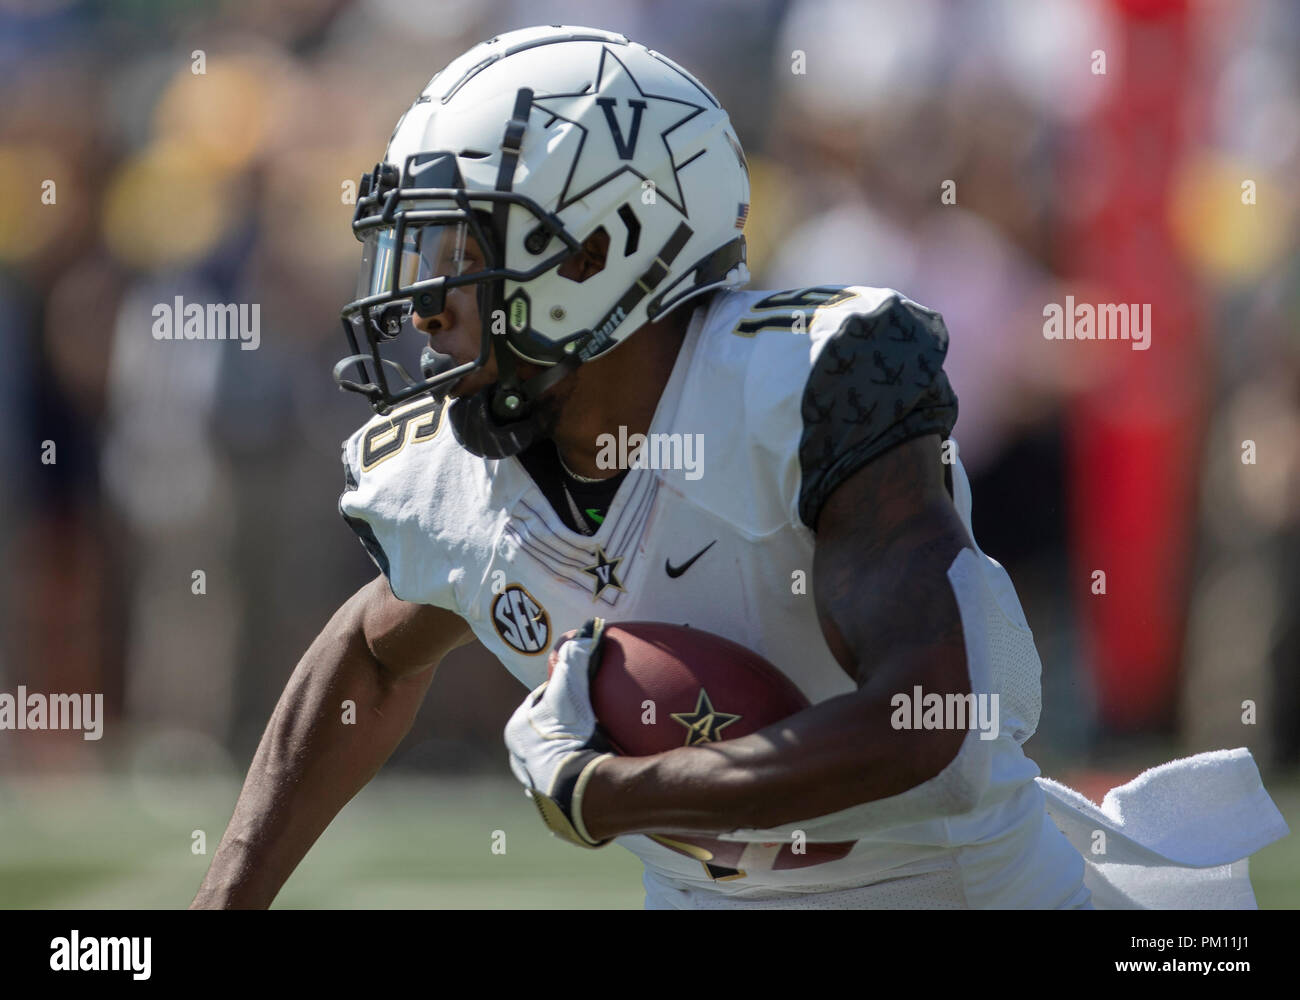 September 15, 2018: Vanderbilt wide receiver Kalija Lipscomb (16) runs with the ball during NCAA football game action between the Vanderbilt Commodores and the Notre Dame Fighting Irish at Notre Dame Stadium in South Bend, Indiana. Notre Dame defeated Vanderbilt 22-17. John Mersits/CSM. Stock Photo